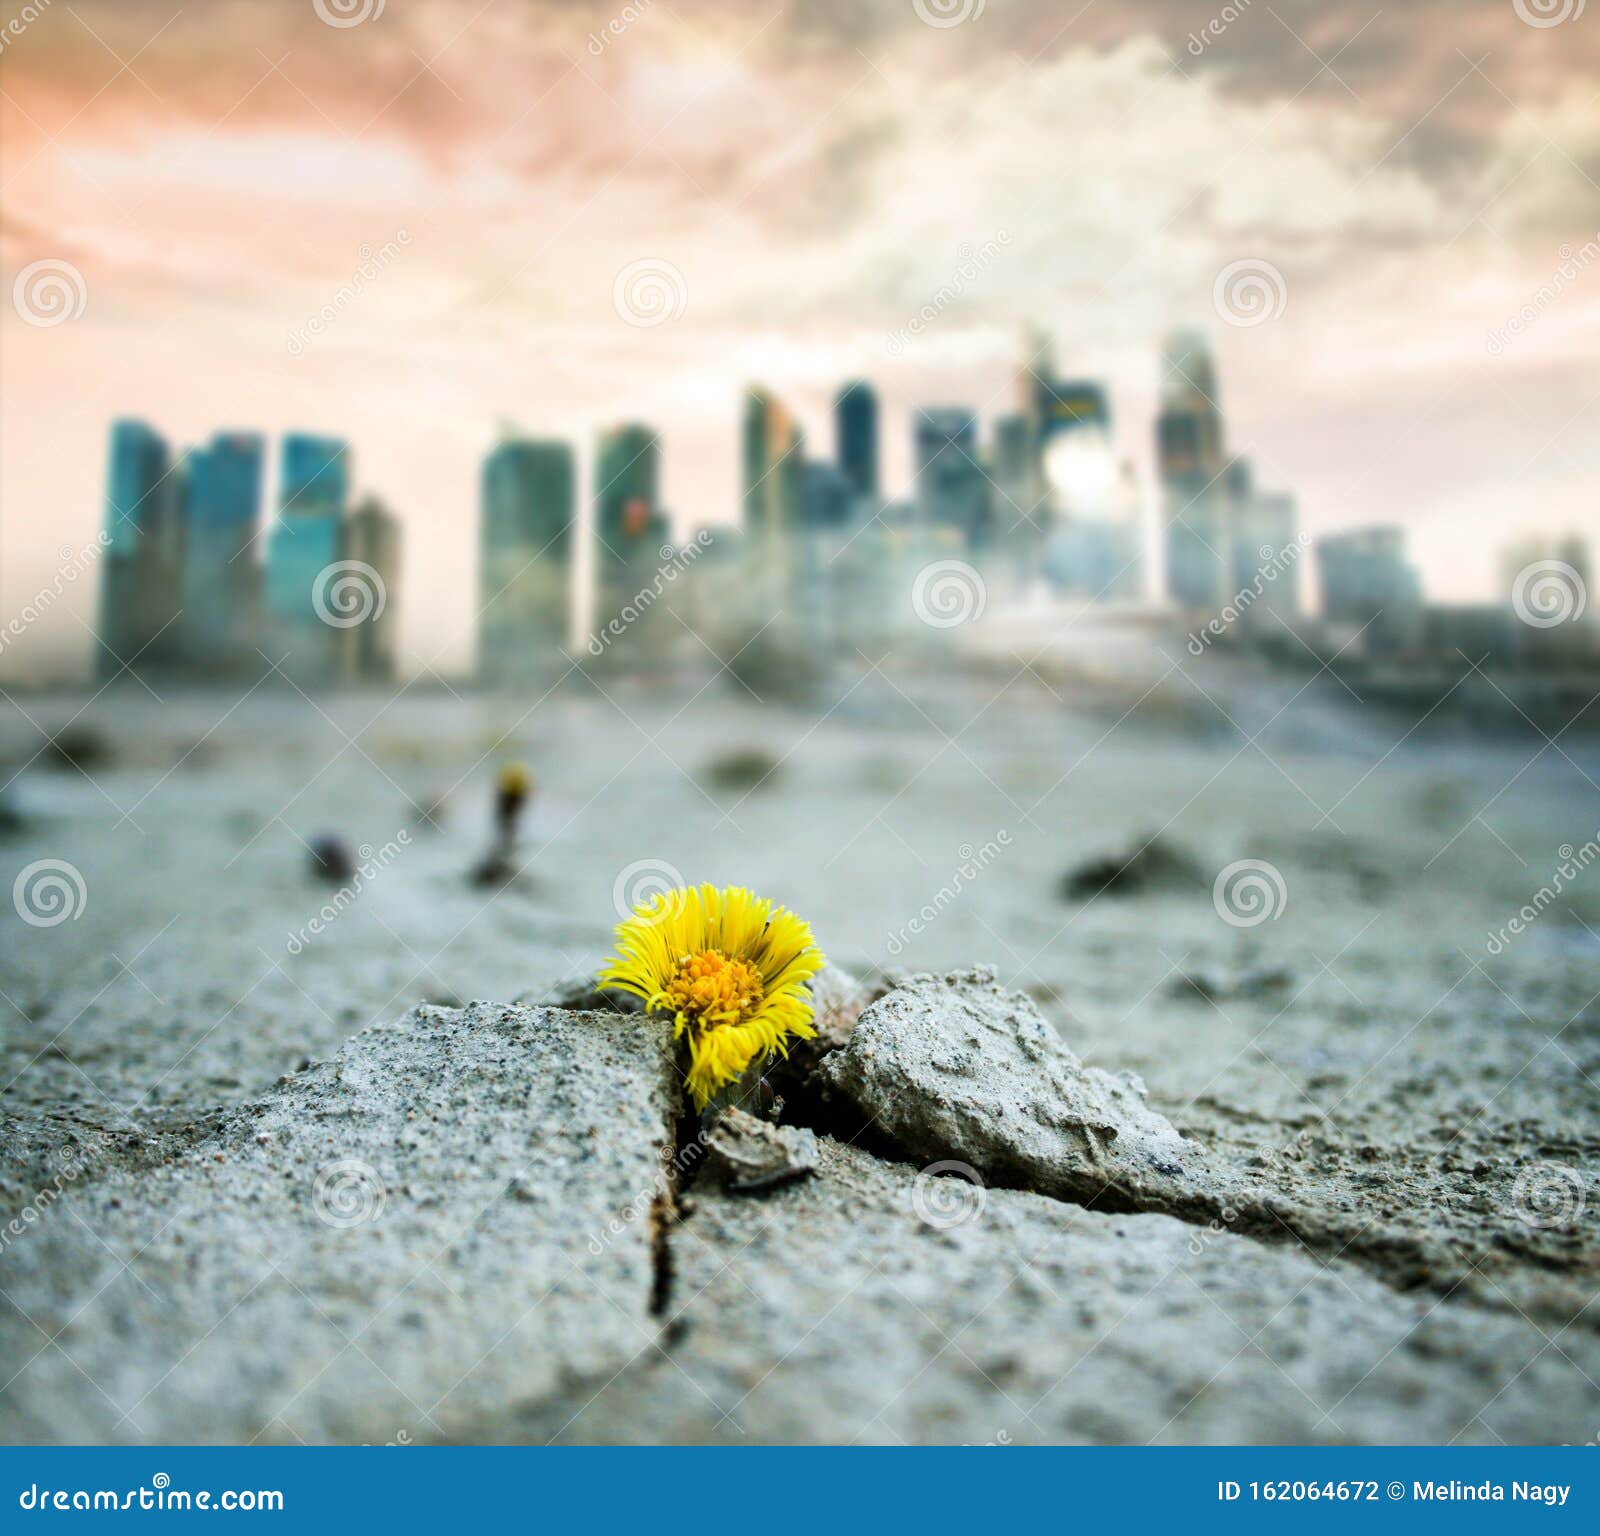 climate change or global warming banner - yellow flower growing in cracked dried land, grey polluted city in the background